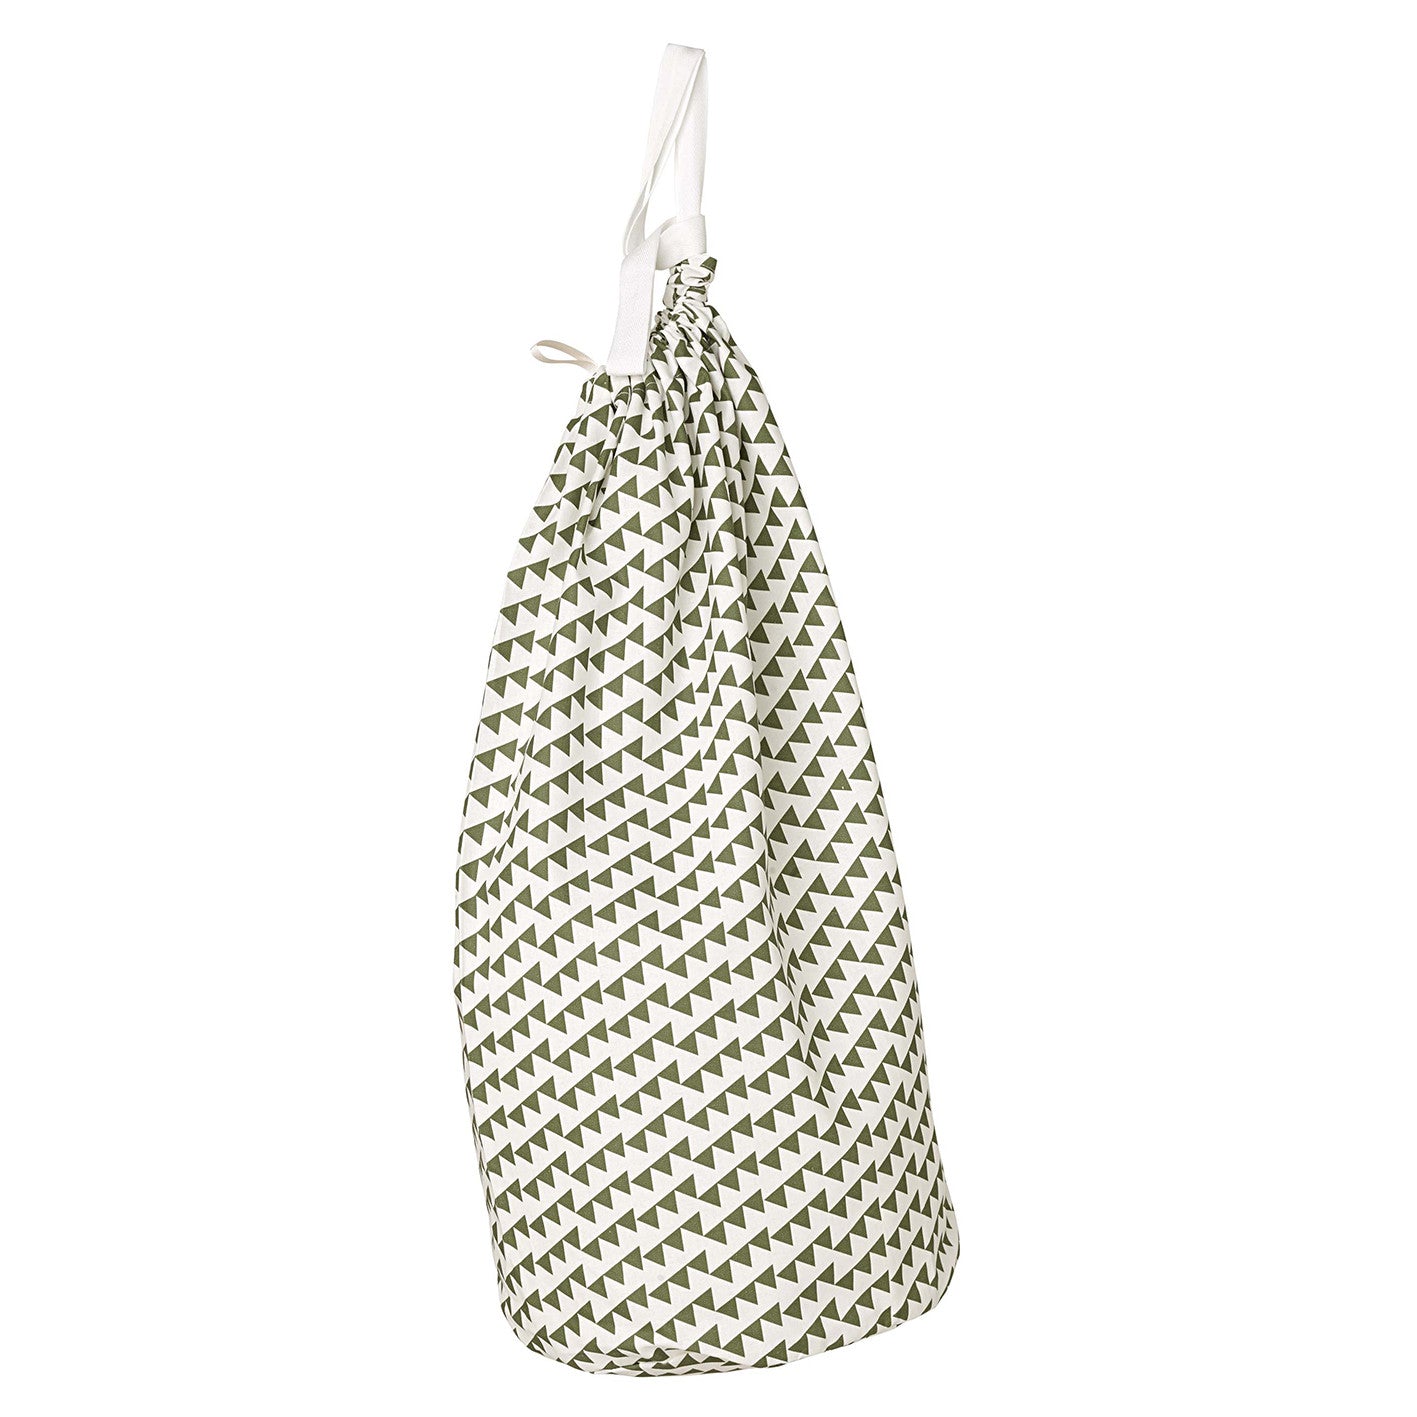 Bunting Geometric Pattern Linen Cotton Drawstring Laundry & Storage Bag in Olive Green Ships from Canada (USA)